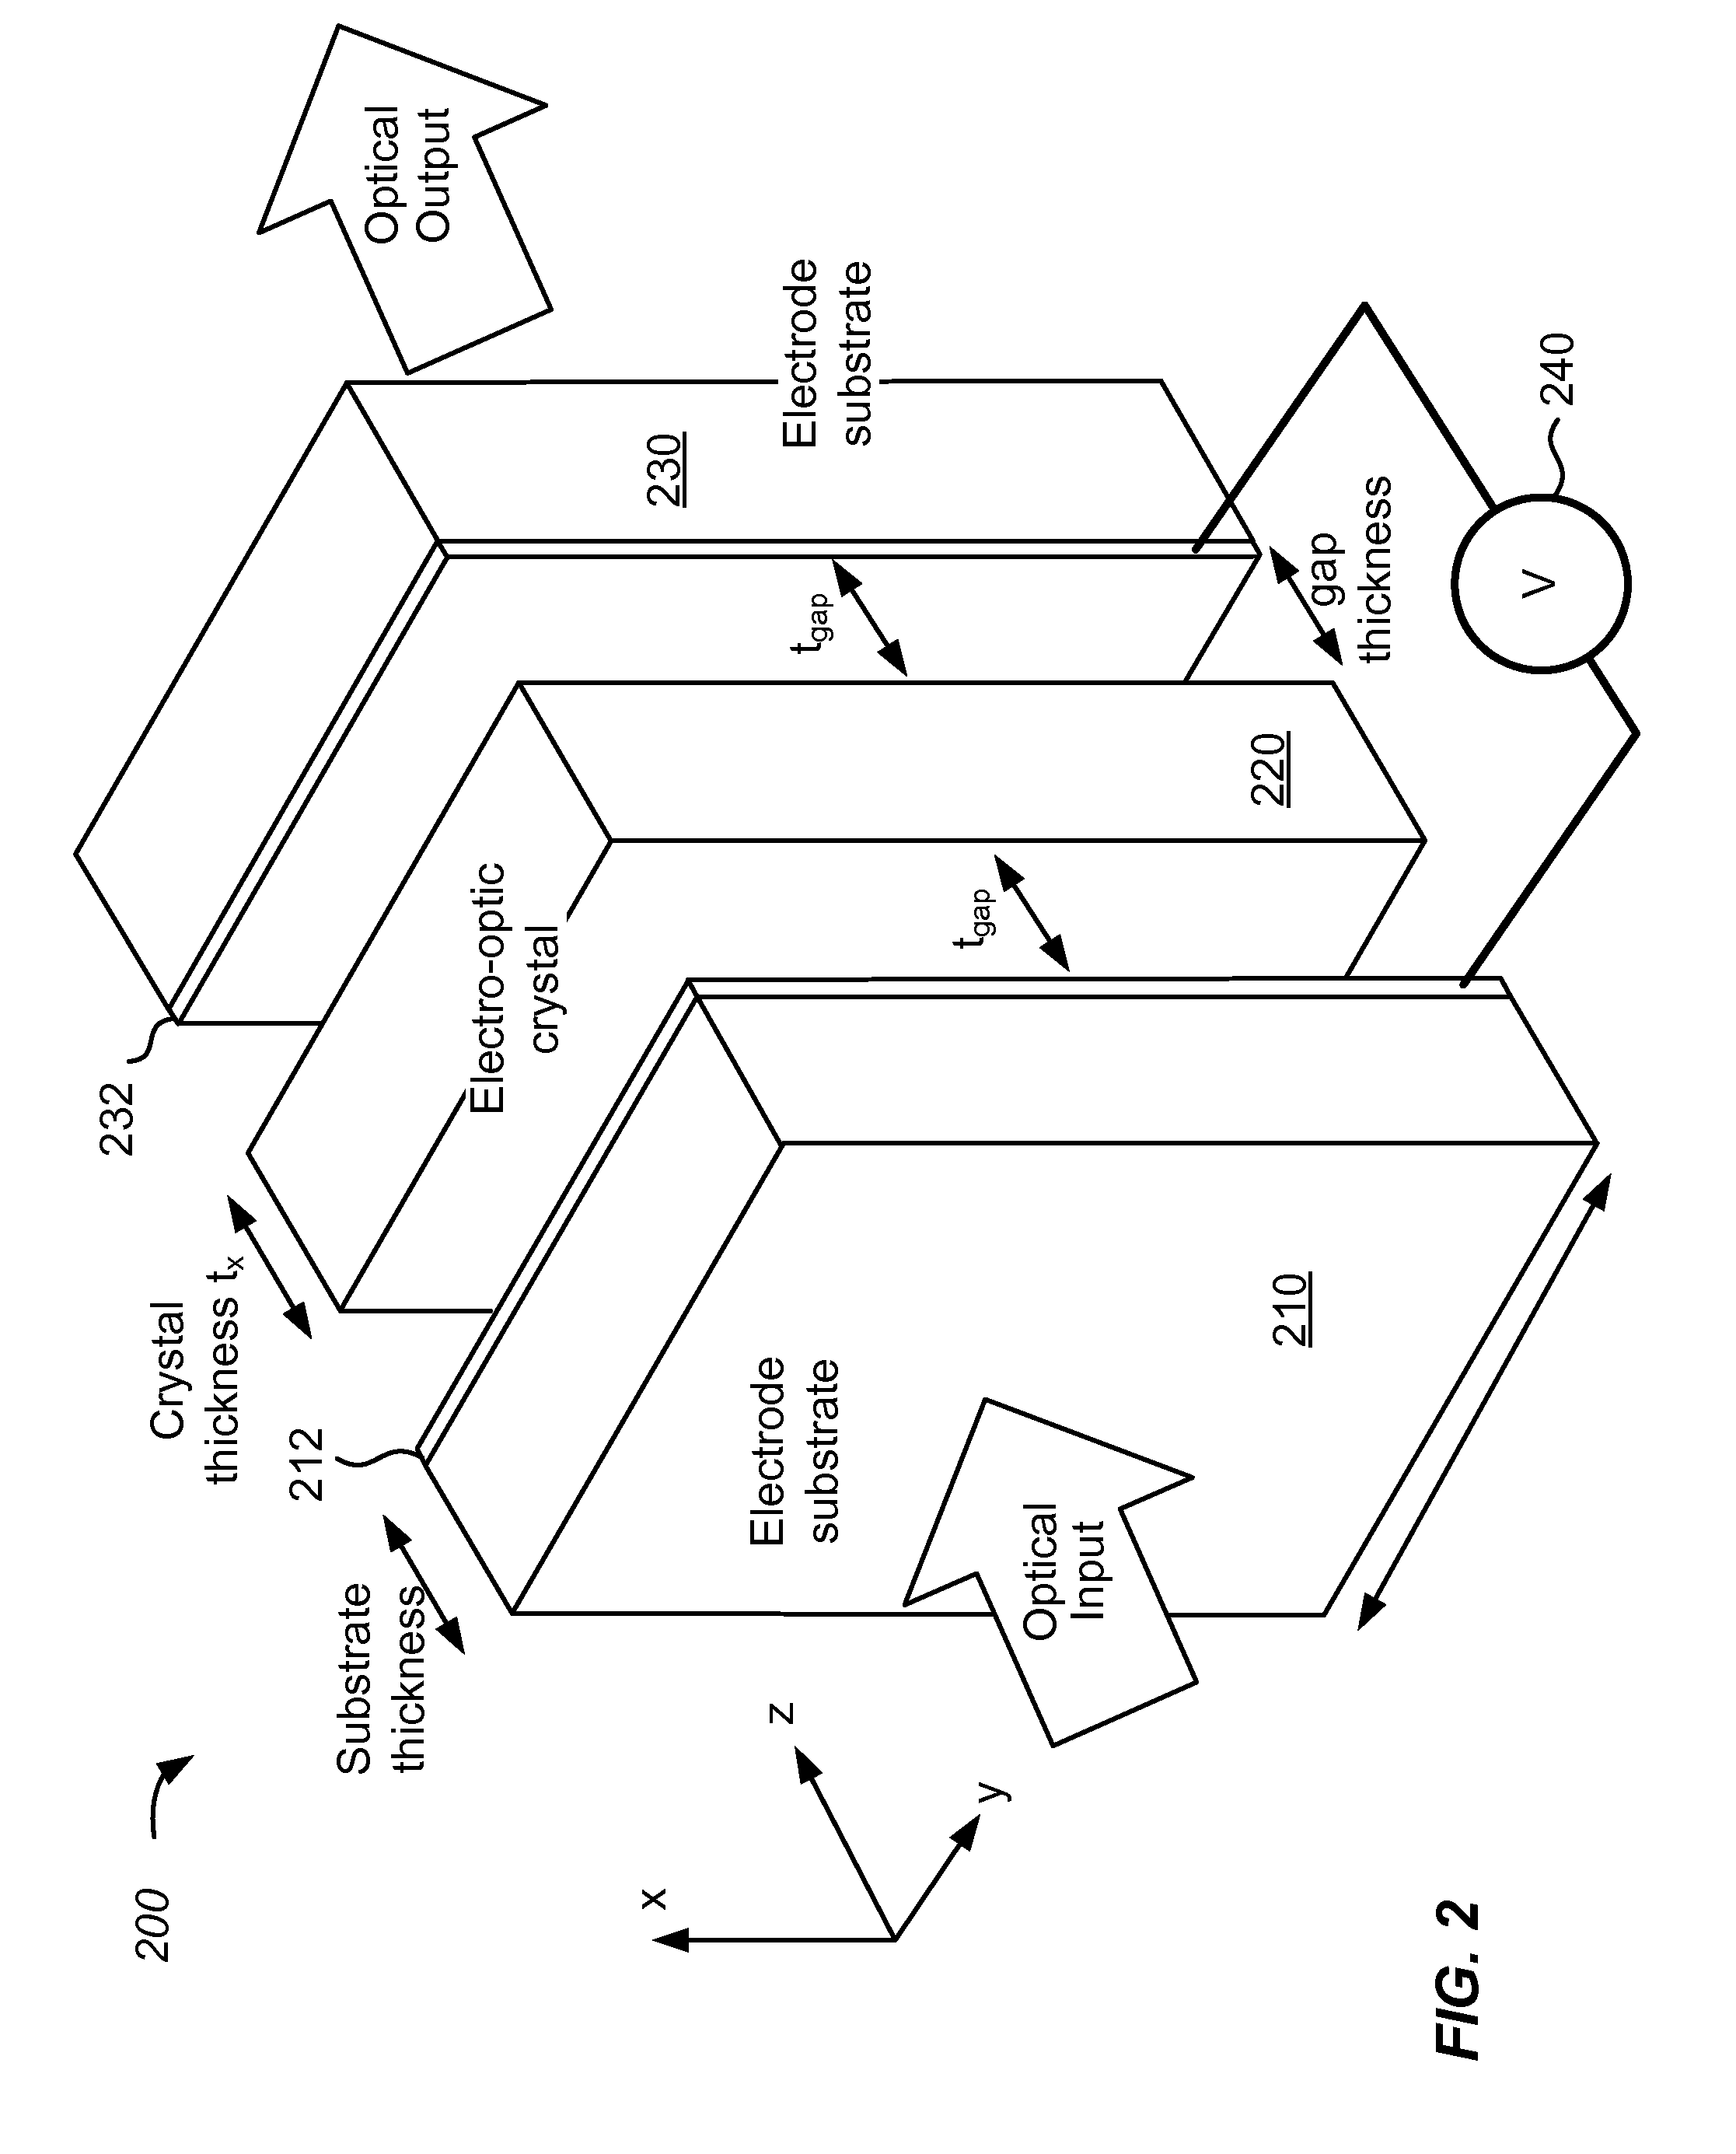 Electro-optic device with gap-coupled electrode